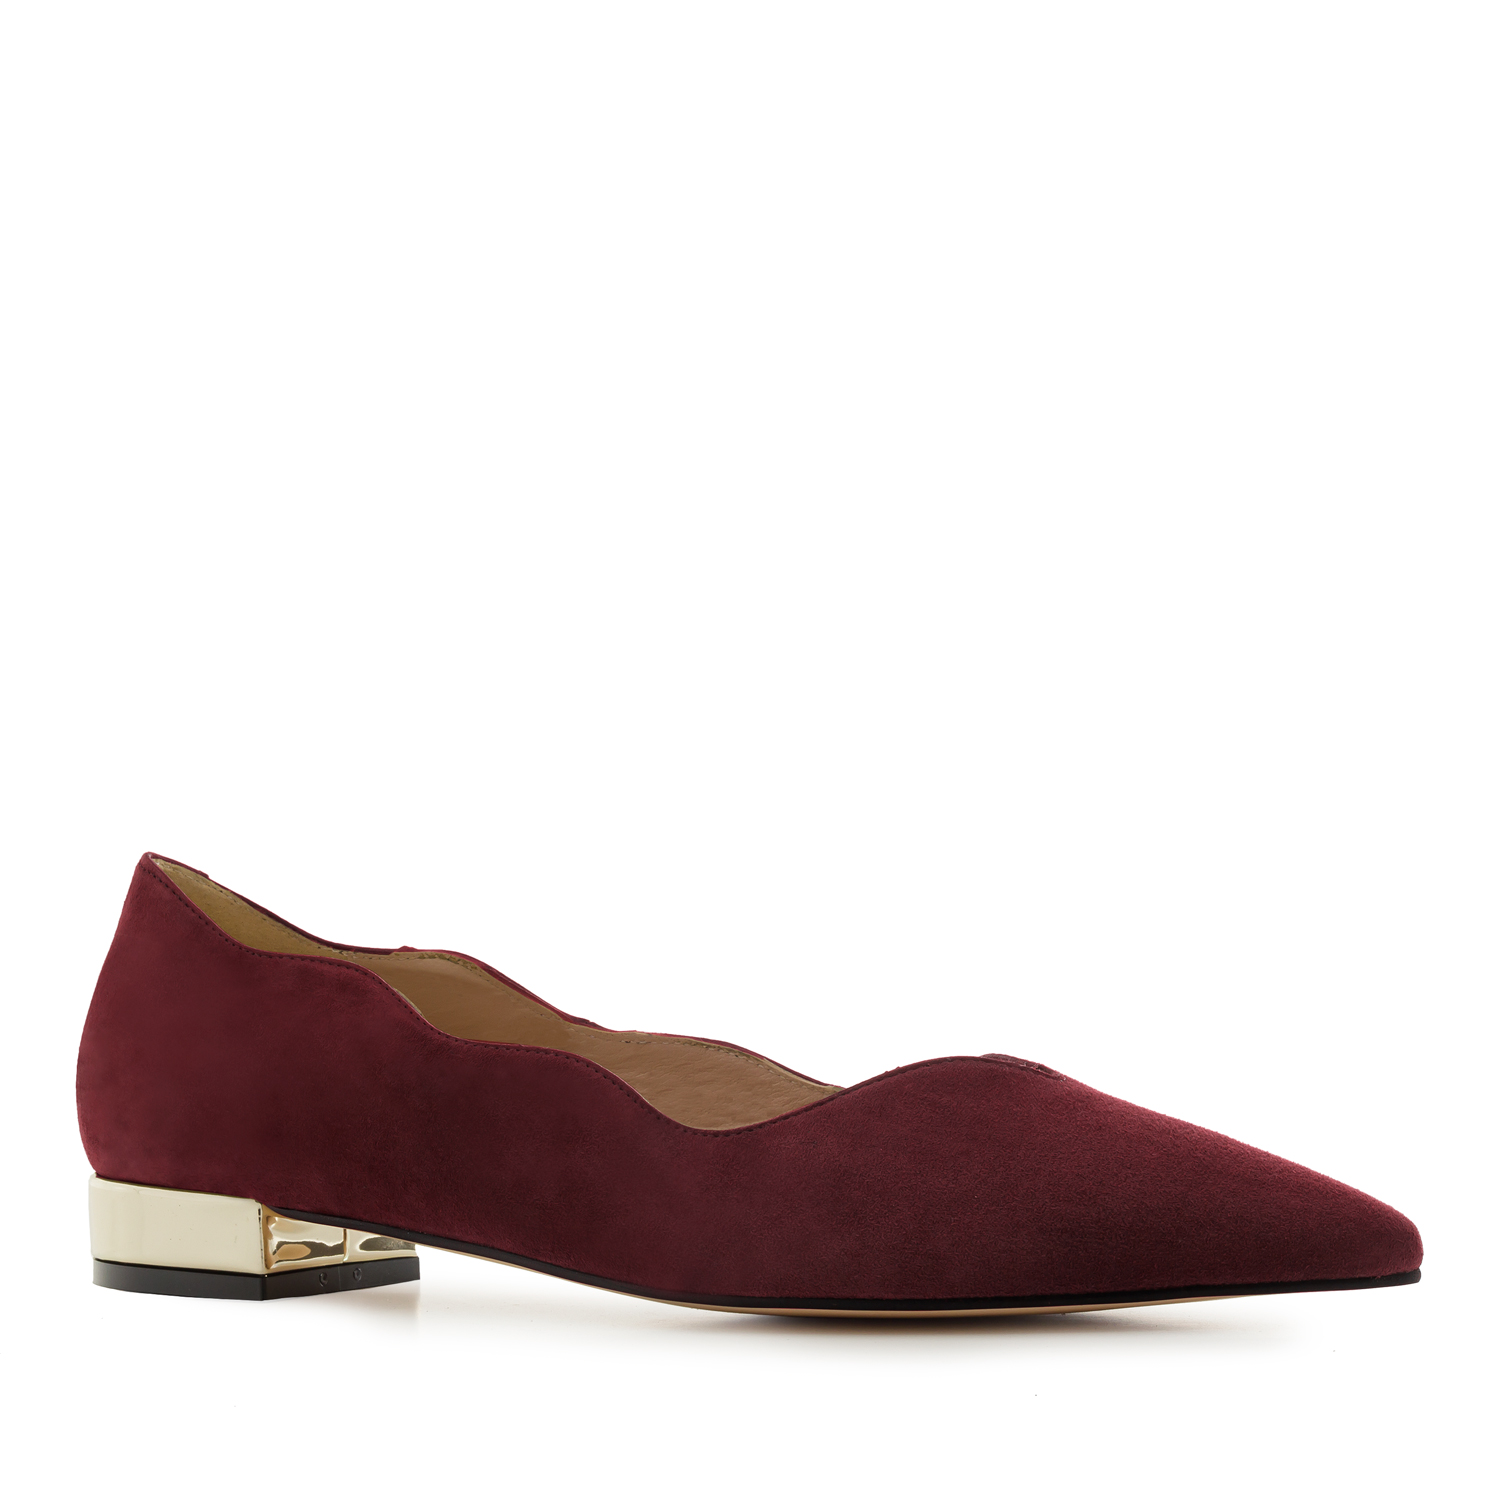 Waved Upper Ballet Flats in Burgundy Nappa Leather 